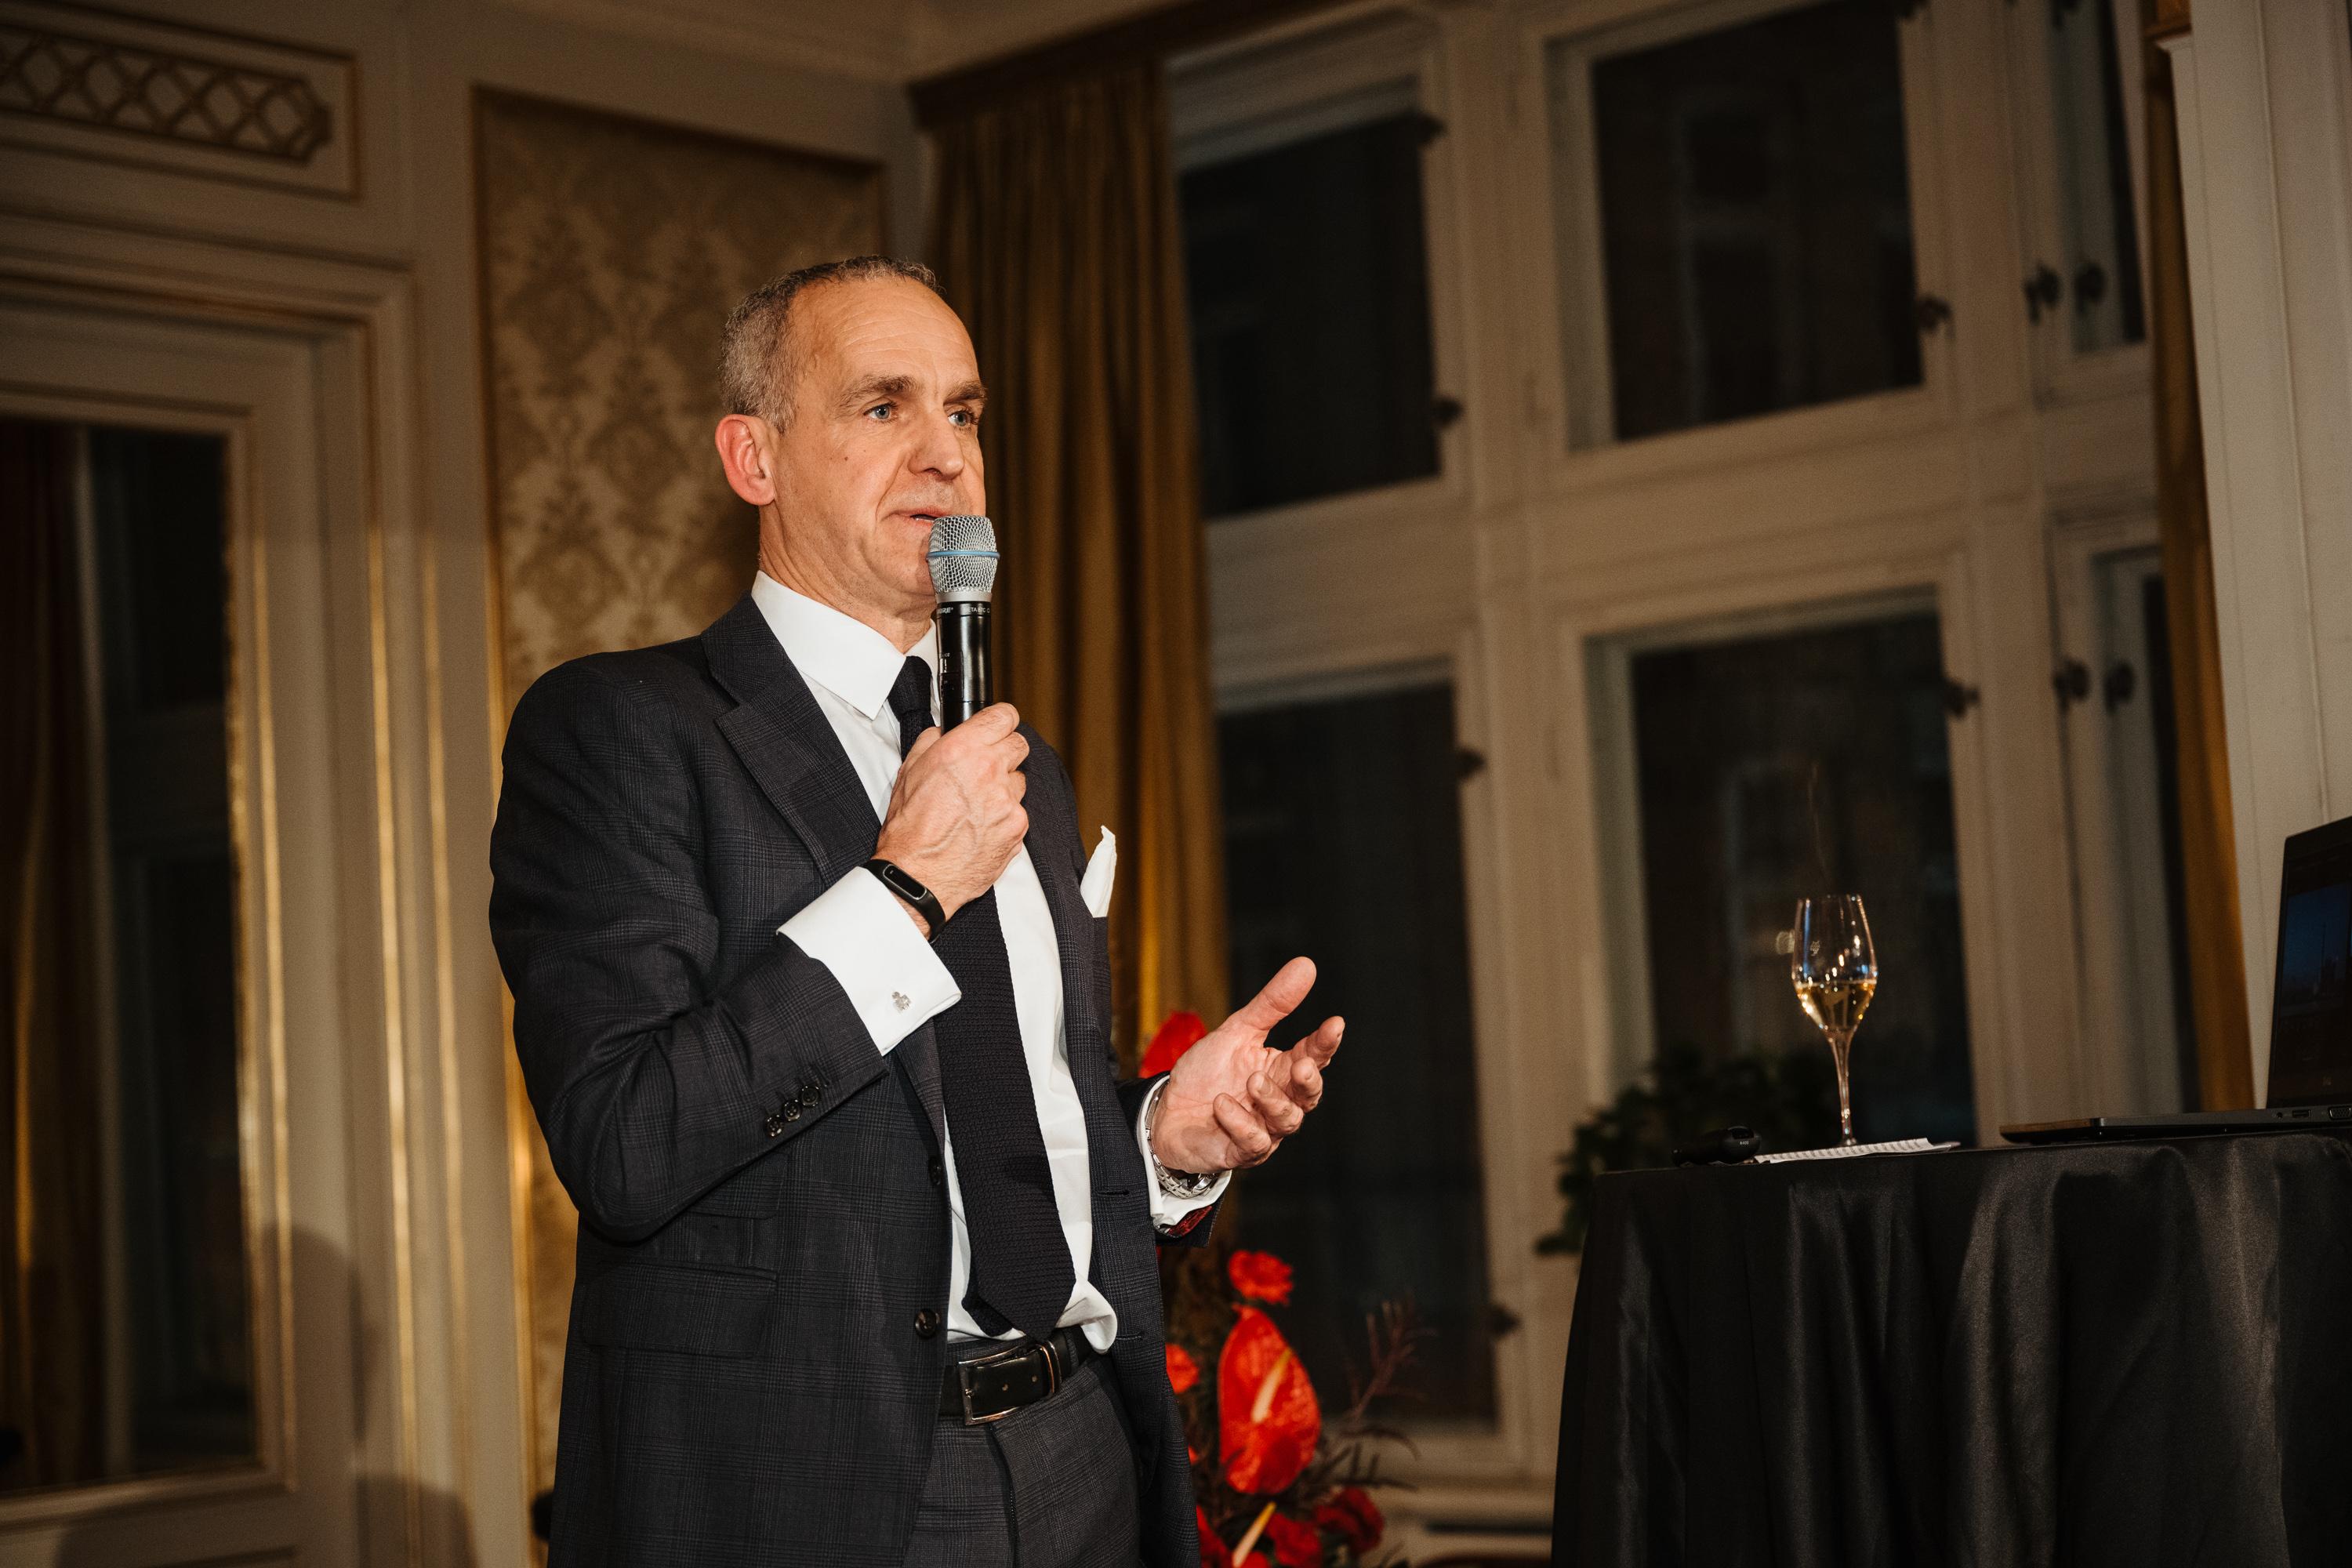 The Hong Kong Economic and Trade Office, London co-hosted receptions in Copenhagen, Denmark, and Stockholm, Sweden, with local business associations on February 7 and 8 respectively for celebrating the Year of the Rabbit. Photo shows the Chairman of the Hong Kong Chamber of Commerce in Sweden, Mr Mats Gerlam, delivering a speech at the Stockholm reception.